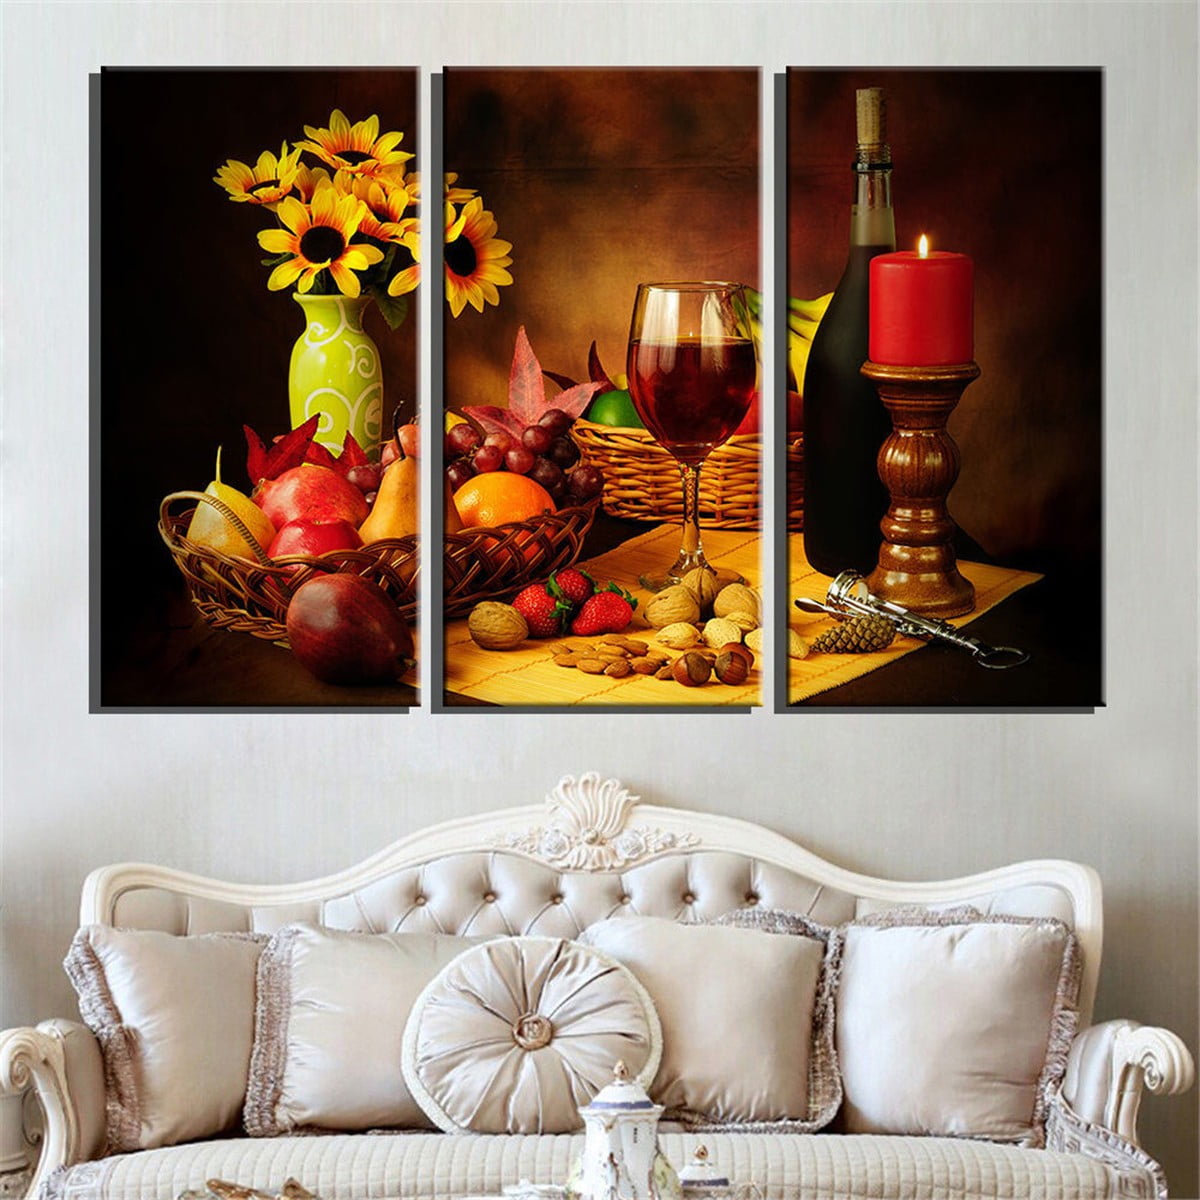 3Pcs Modern Home Canvas Wall Decor Art Painting Picture Print Red Wine & Grape 